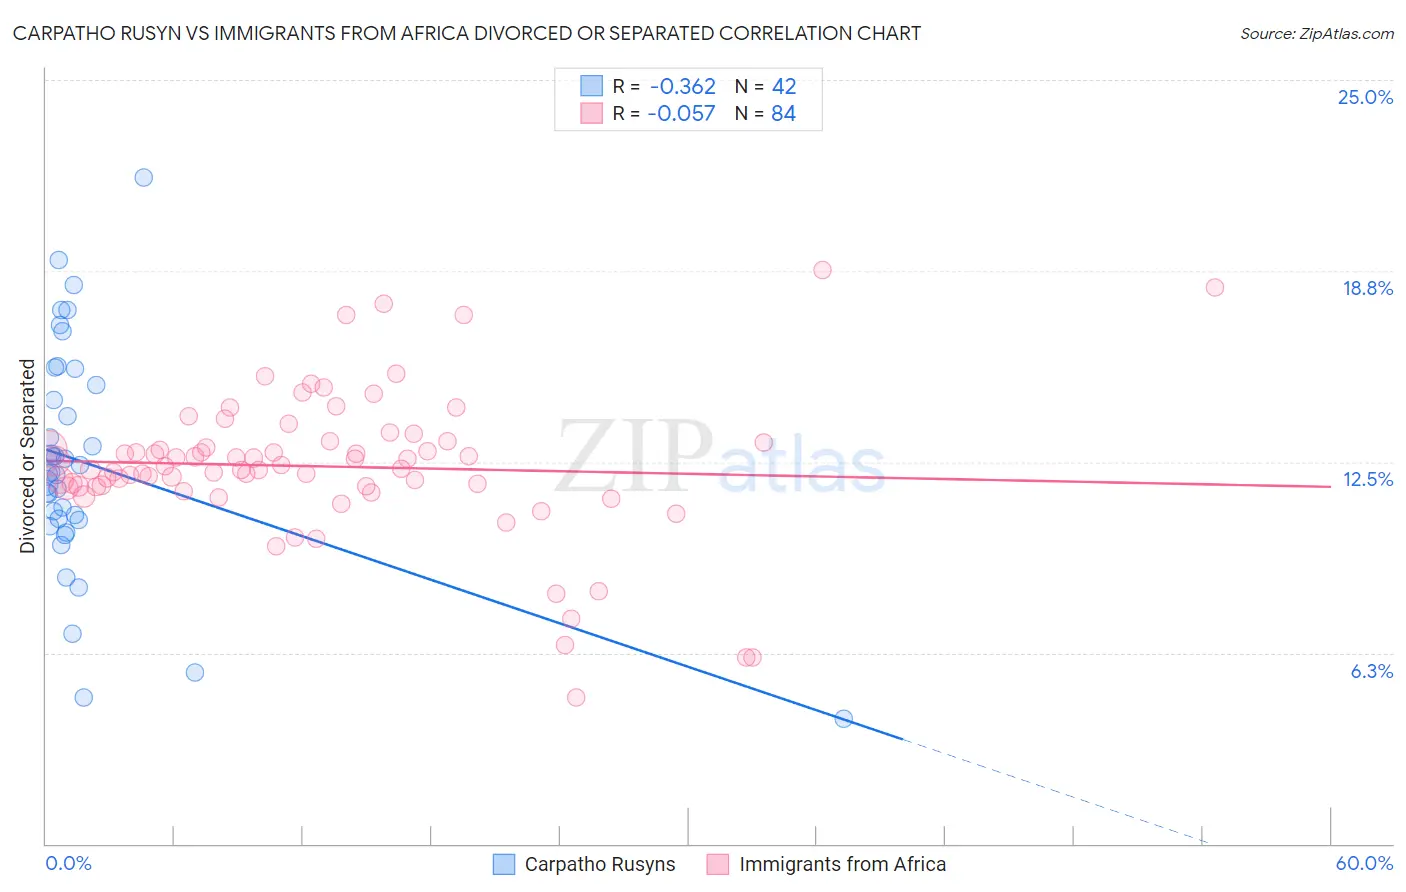 Carpatho Rusyn vs Immigrants from Africa Divorced or Separated